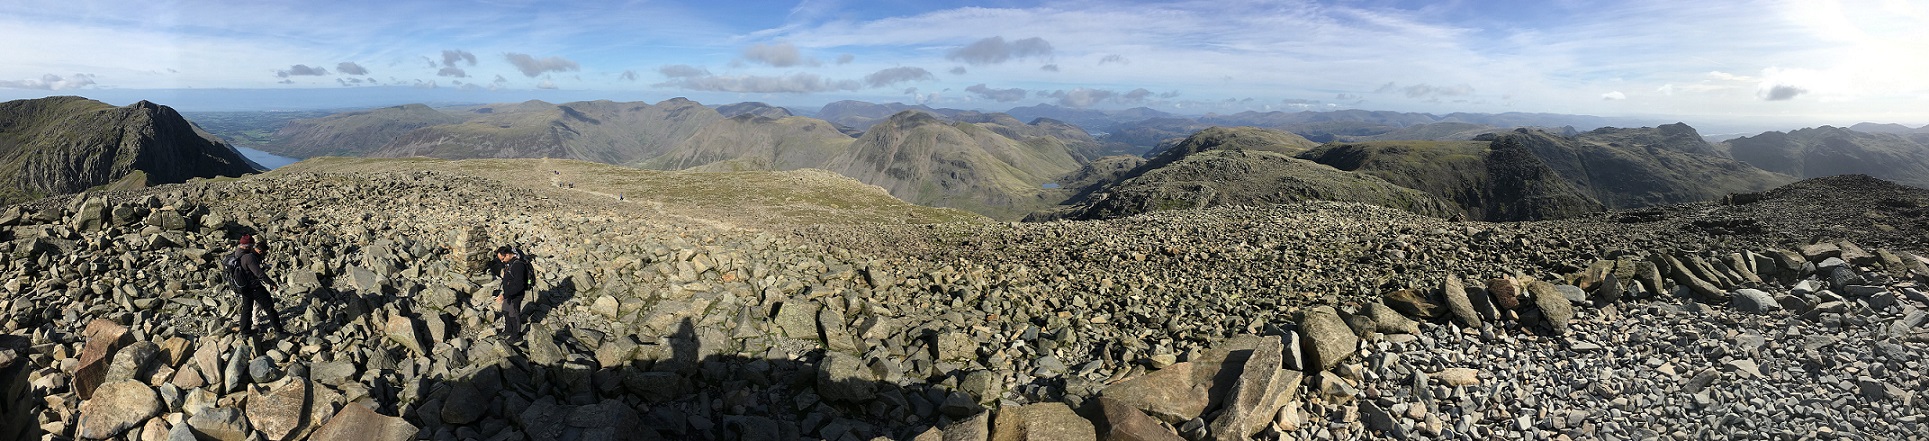 Panorama from Scafell Pike summit - English Lake District